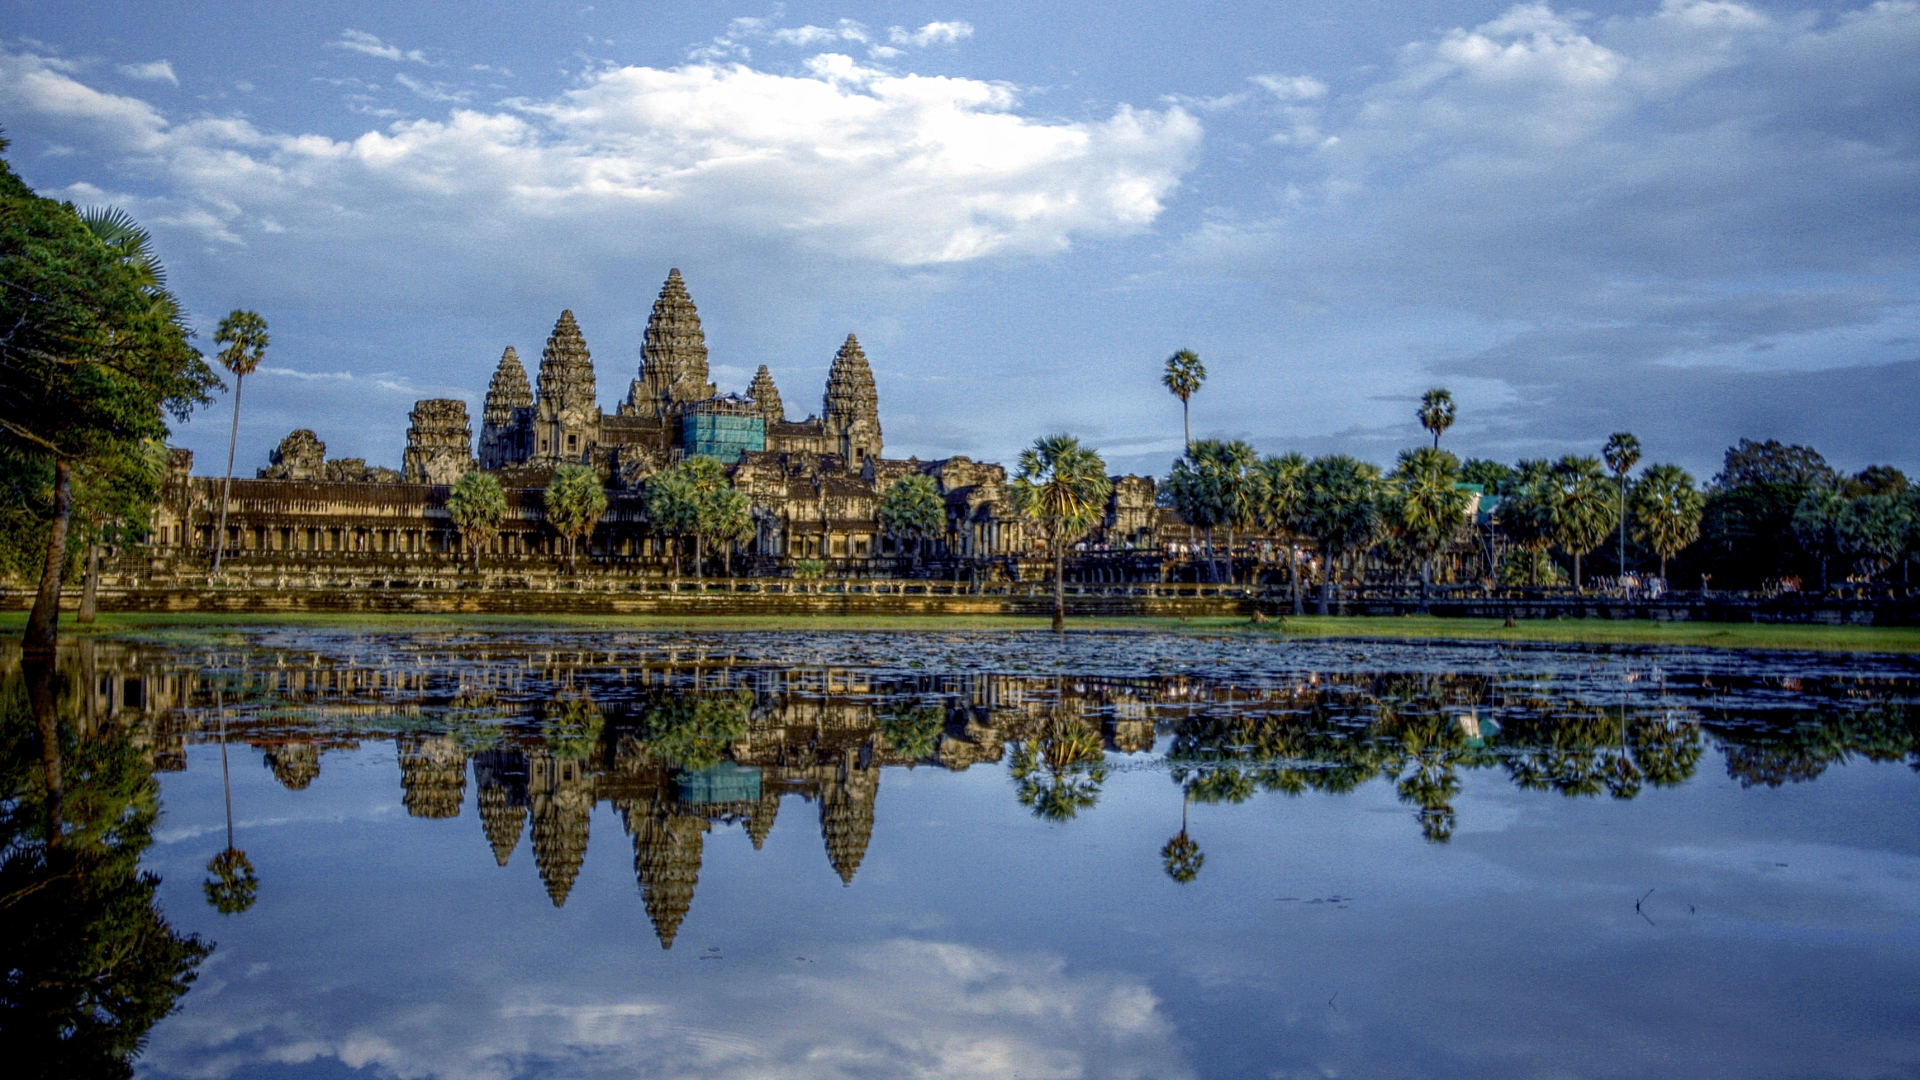 Buddhist Temple Of Angkor Wat In Cambodia HDr Wallpaper